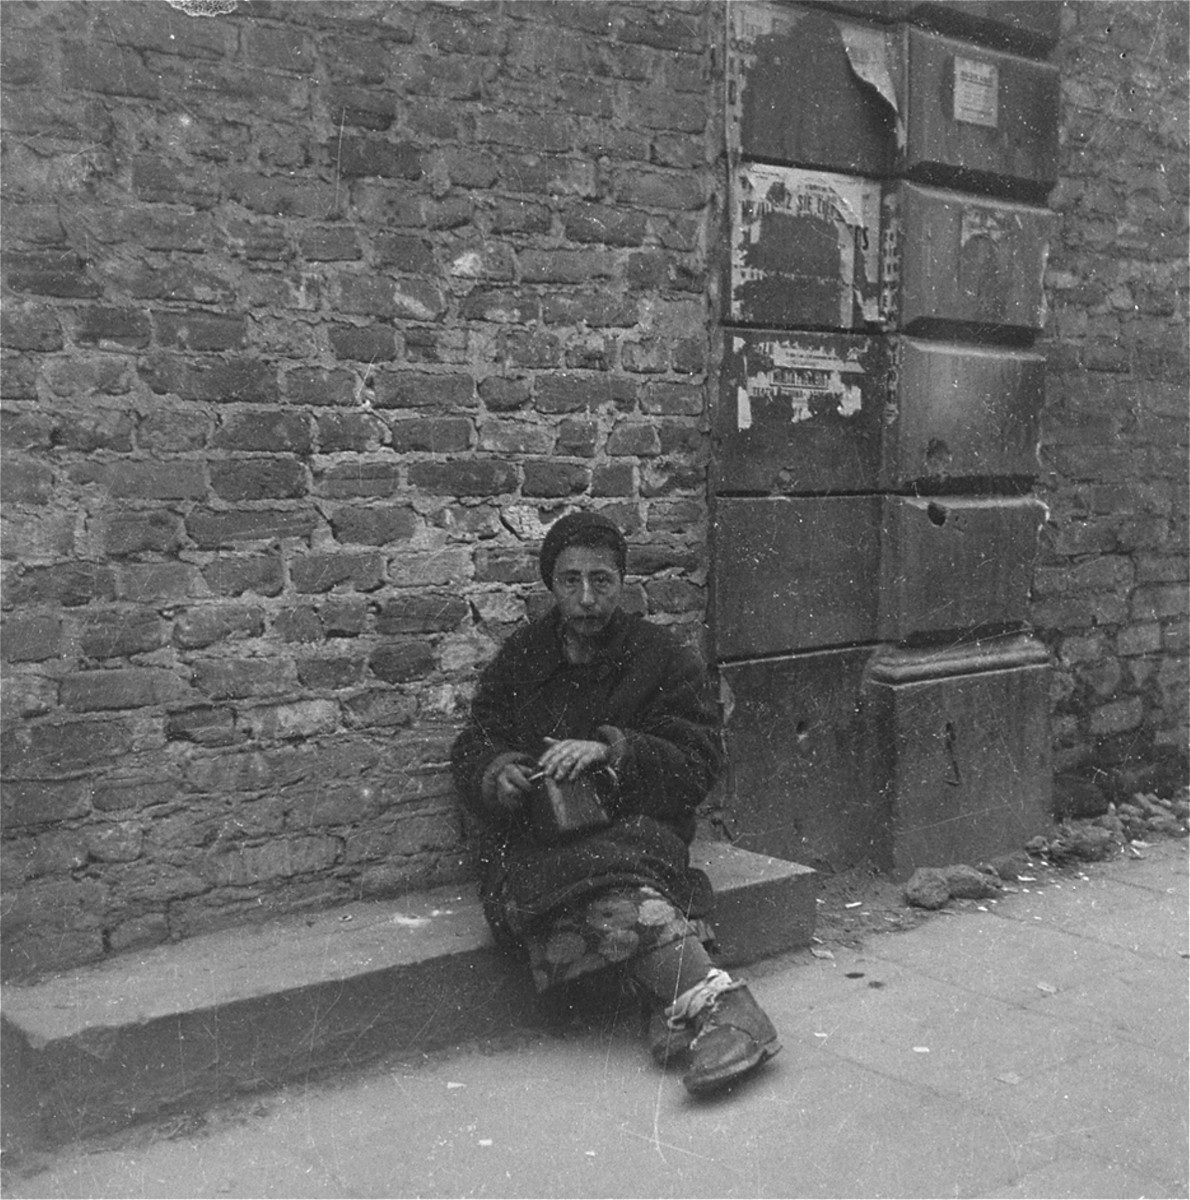 A destitute woman on the street in the Warsaw ghetto.

Joest's caption reads: "I believe that this woman was a black-marketeer offering something or other for sale.  She fearfully hid the pot in front of me and was thoroughly afraid around the police."